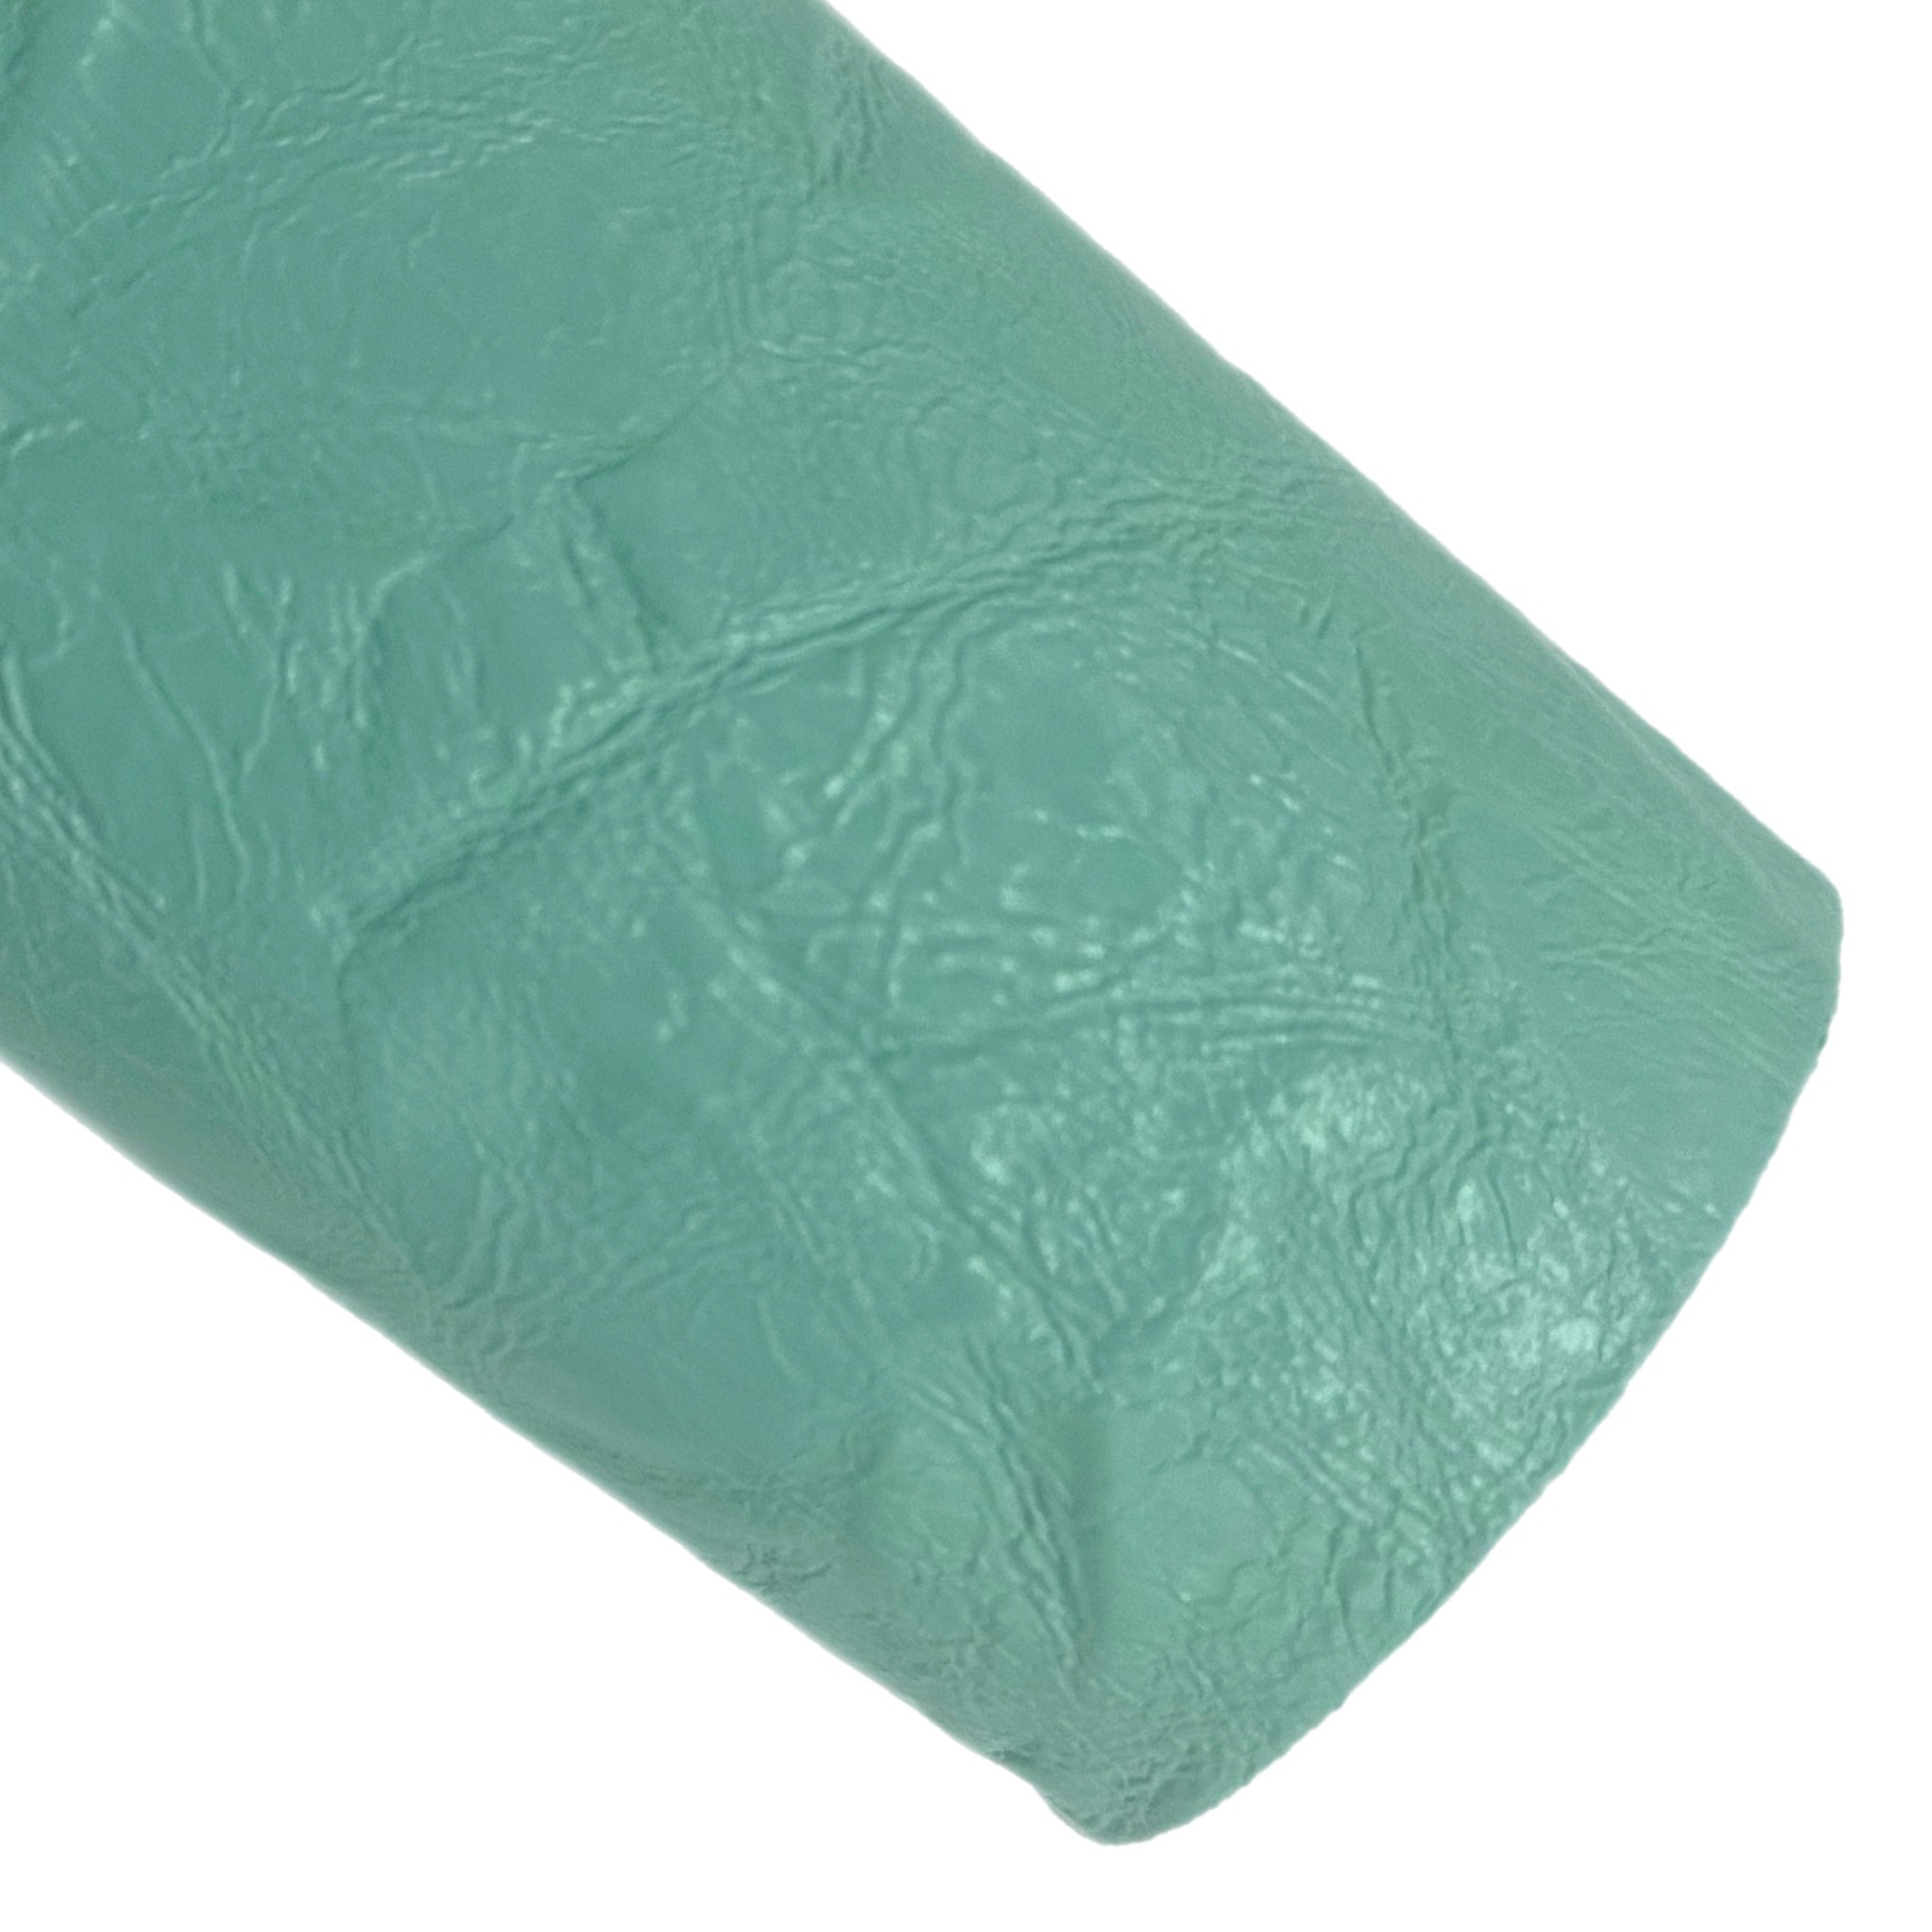 (NEW) Turquoise Crinkle Faux Leather